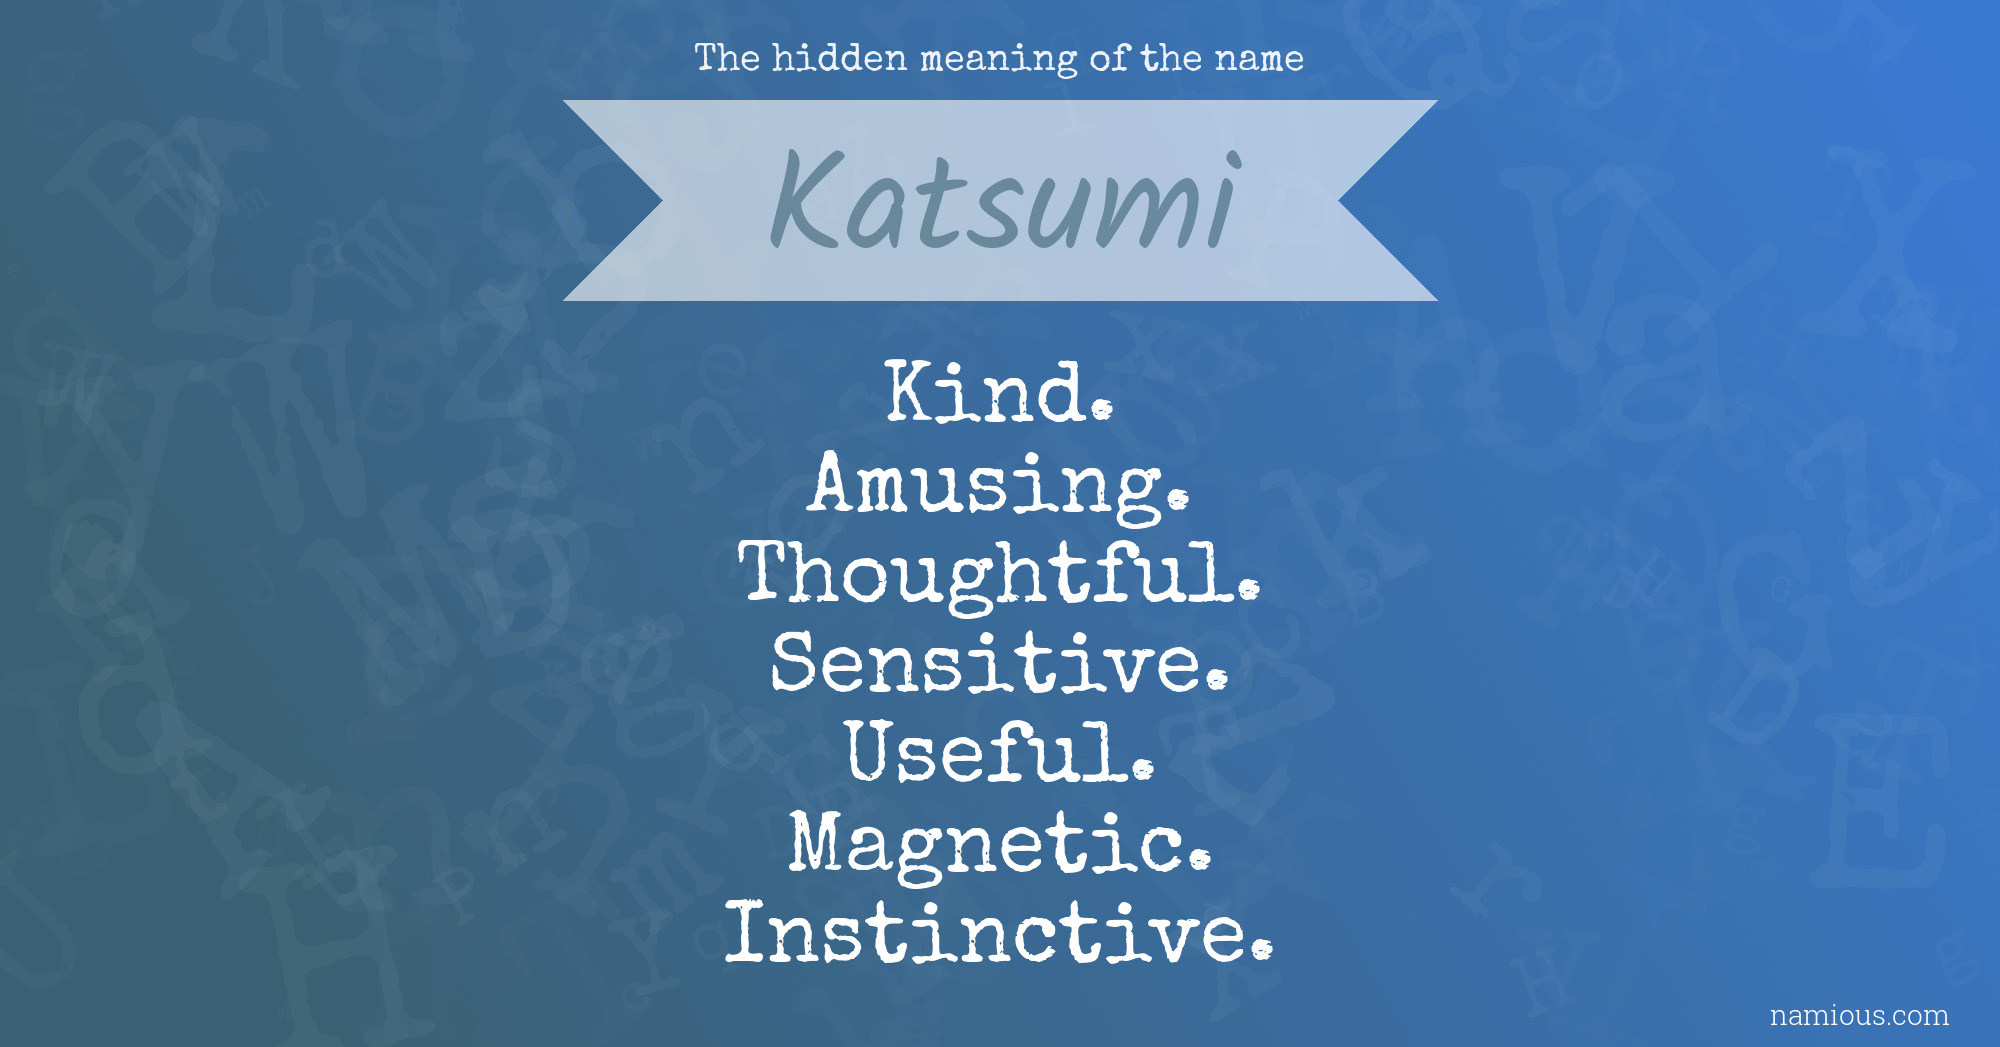 The hidden meaning of the name Katsumi